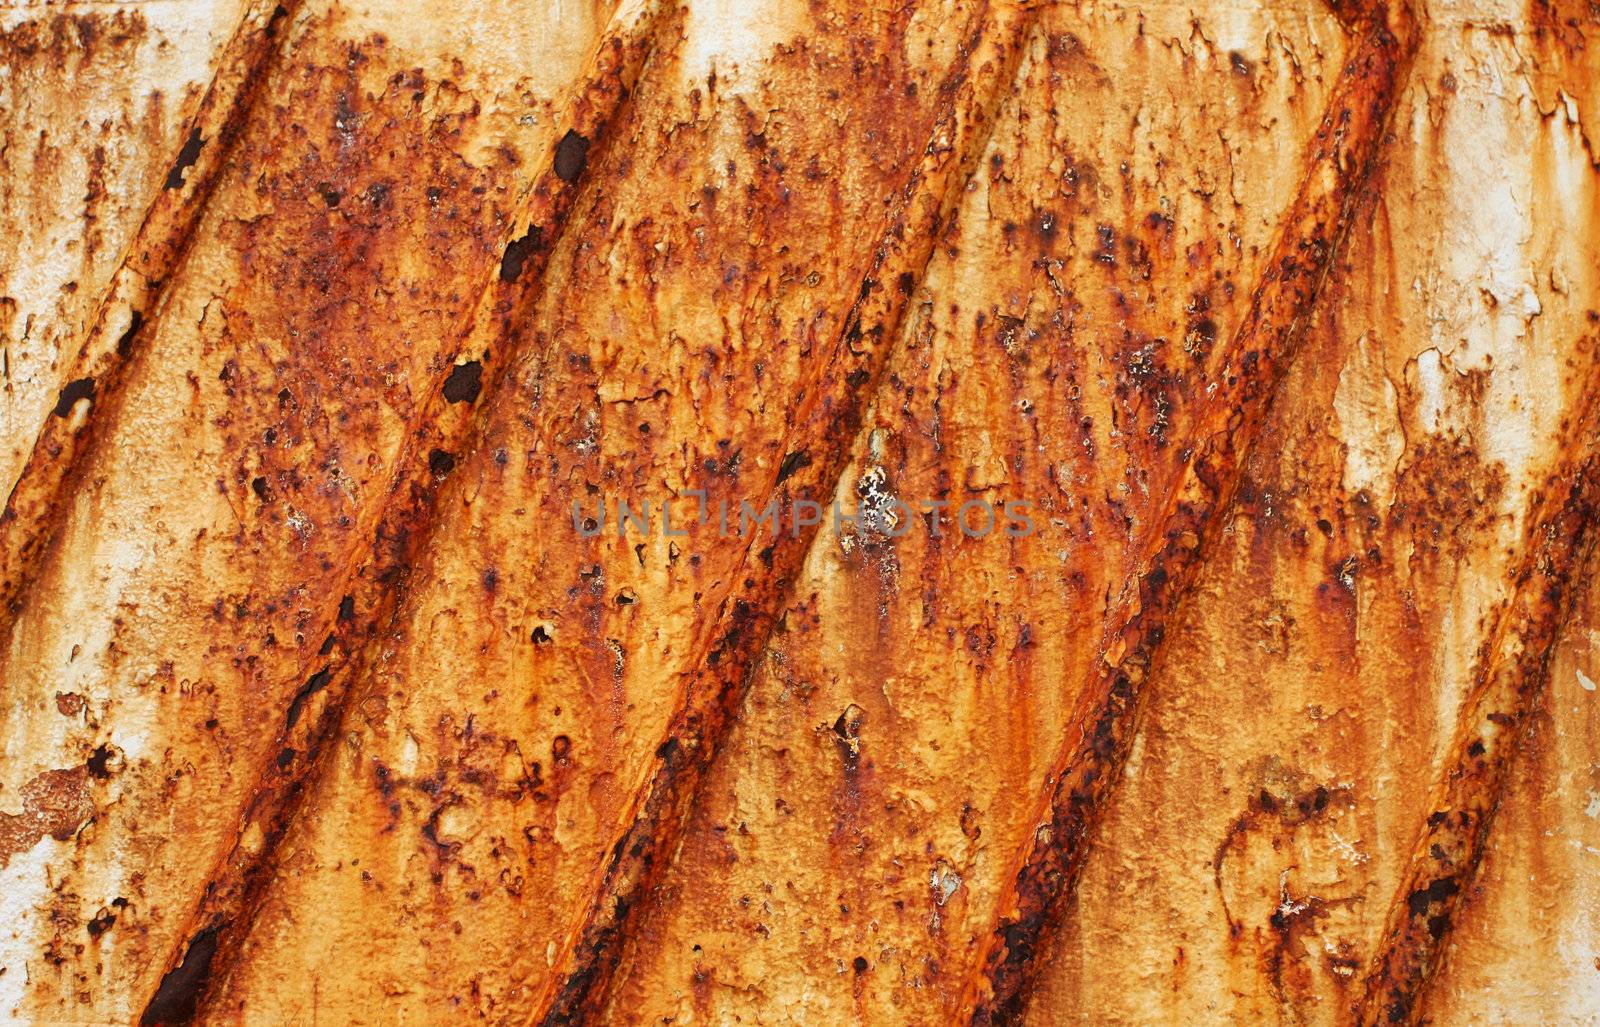 Rusty piece of metal, great texture and detail